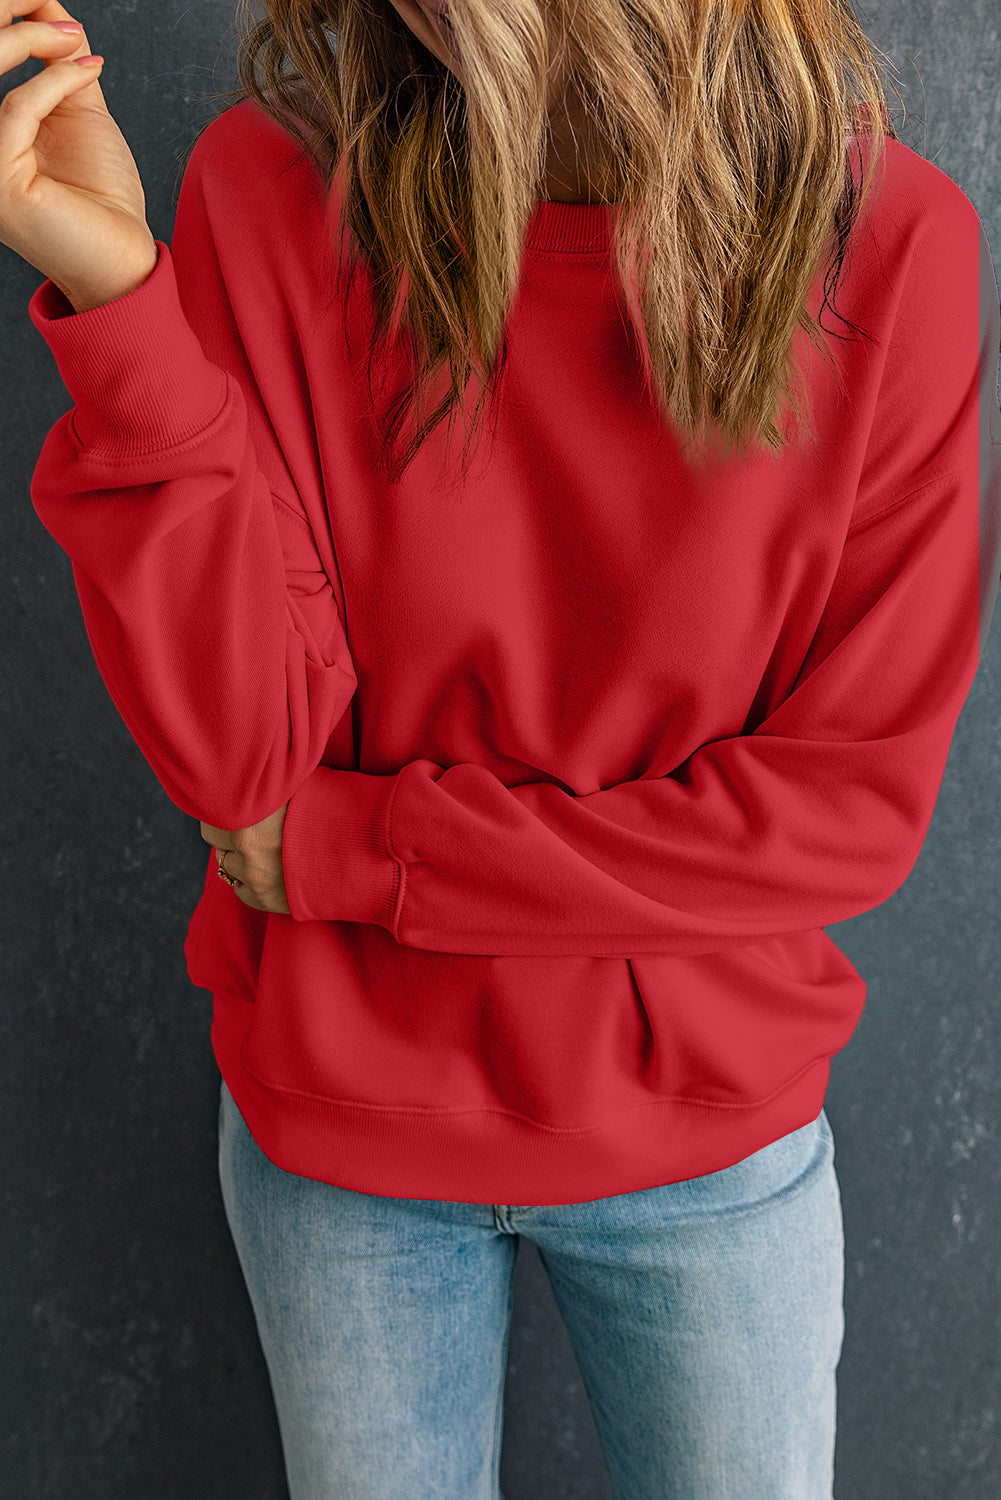 Red Solid Classic Crewneck Pullover Sweatshirt - SELFTRITSS